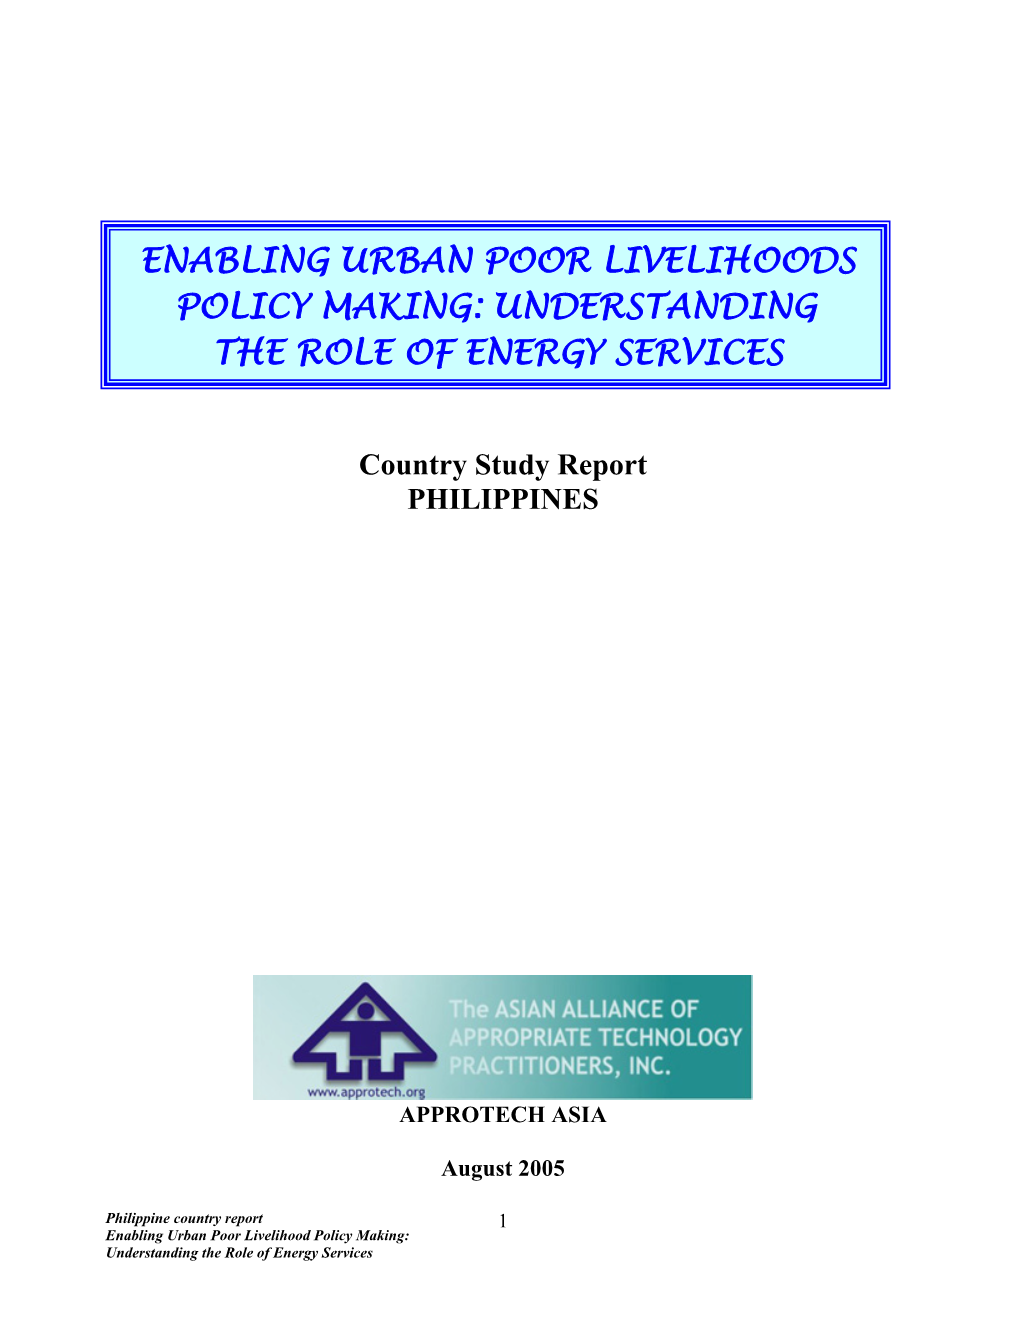 Enabling Urban Poor Livelihoods Policy Making: Understanding the Role of Energy Services